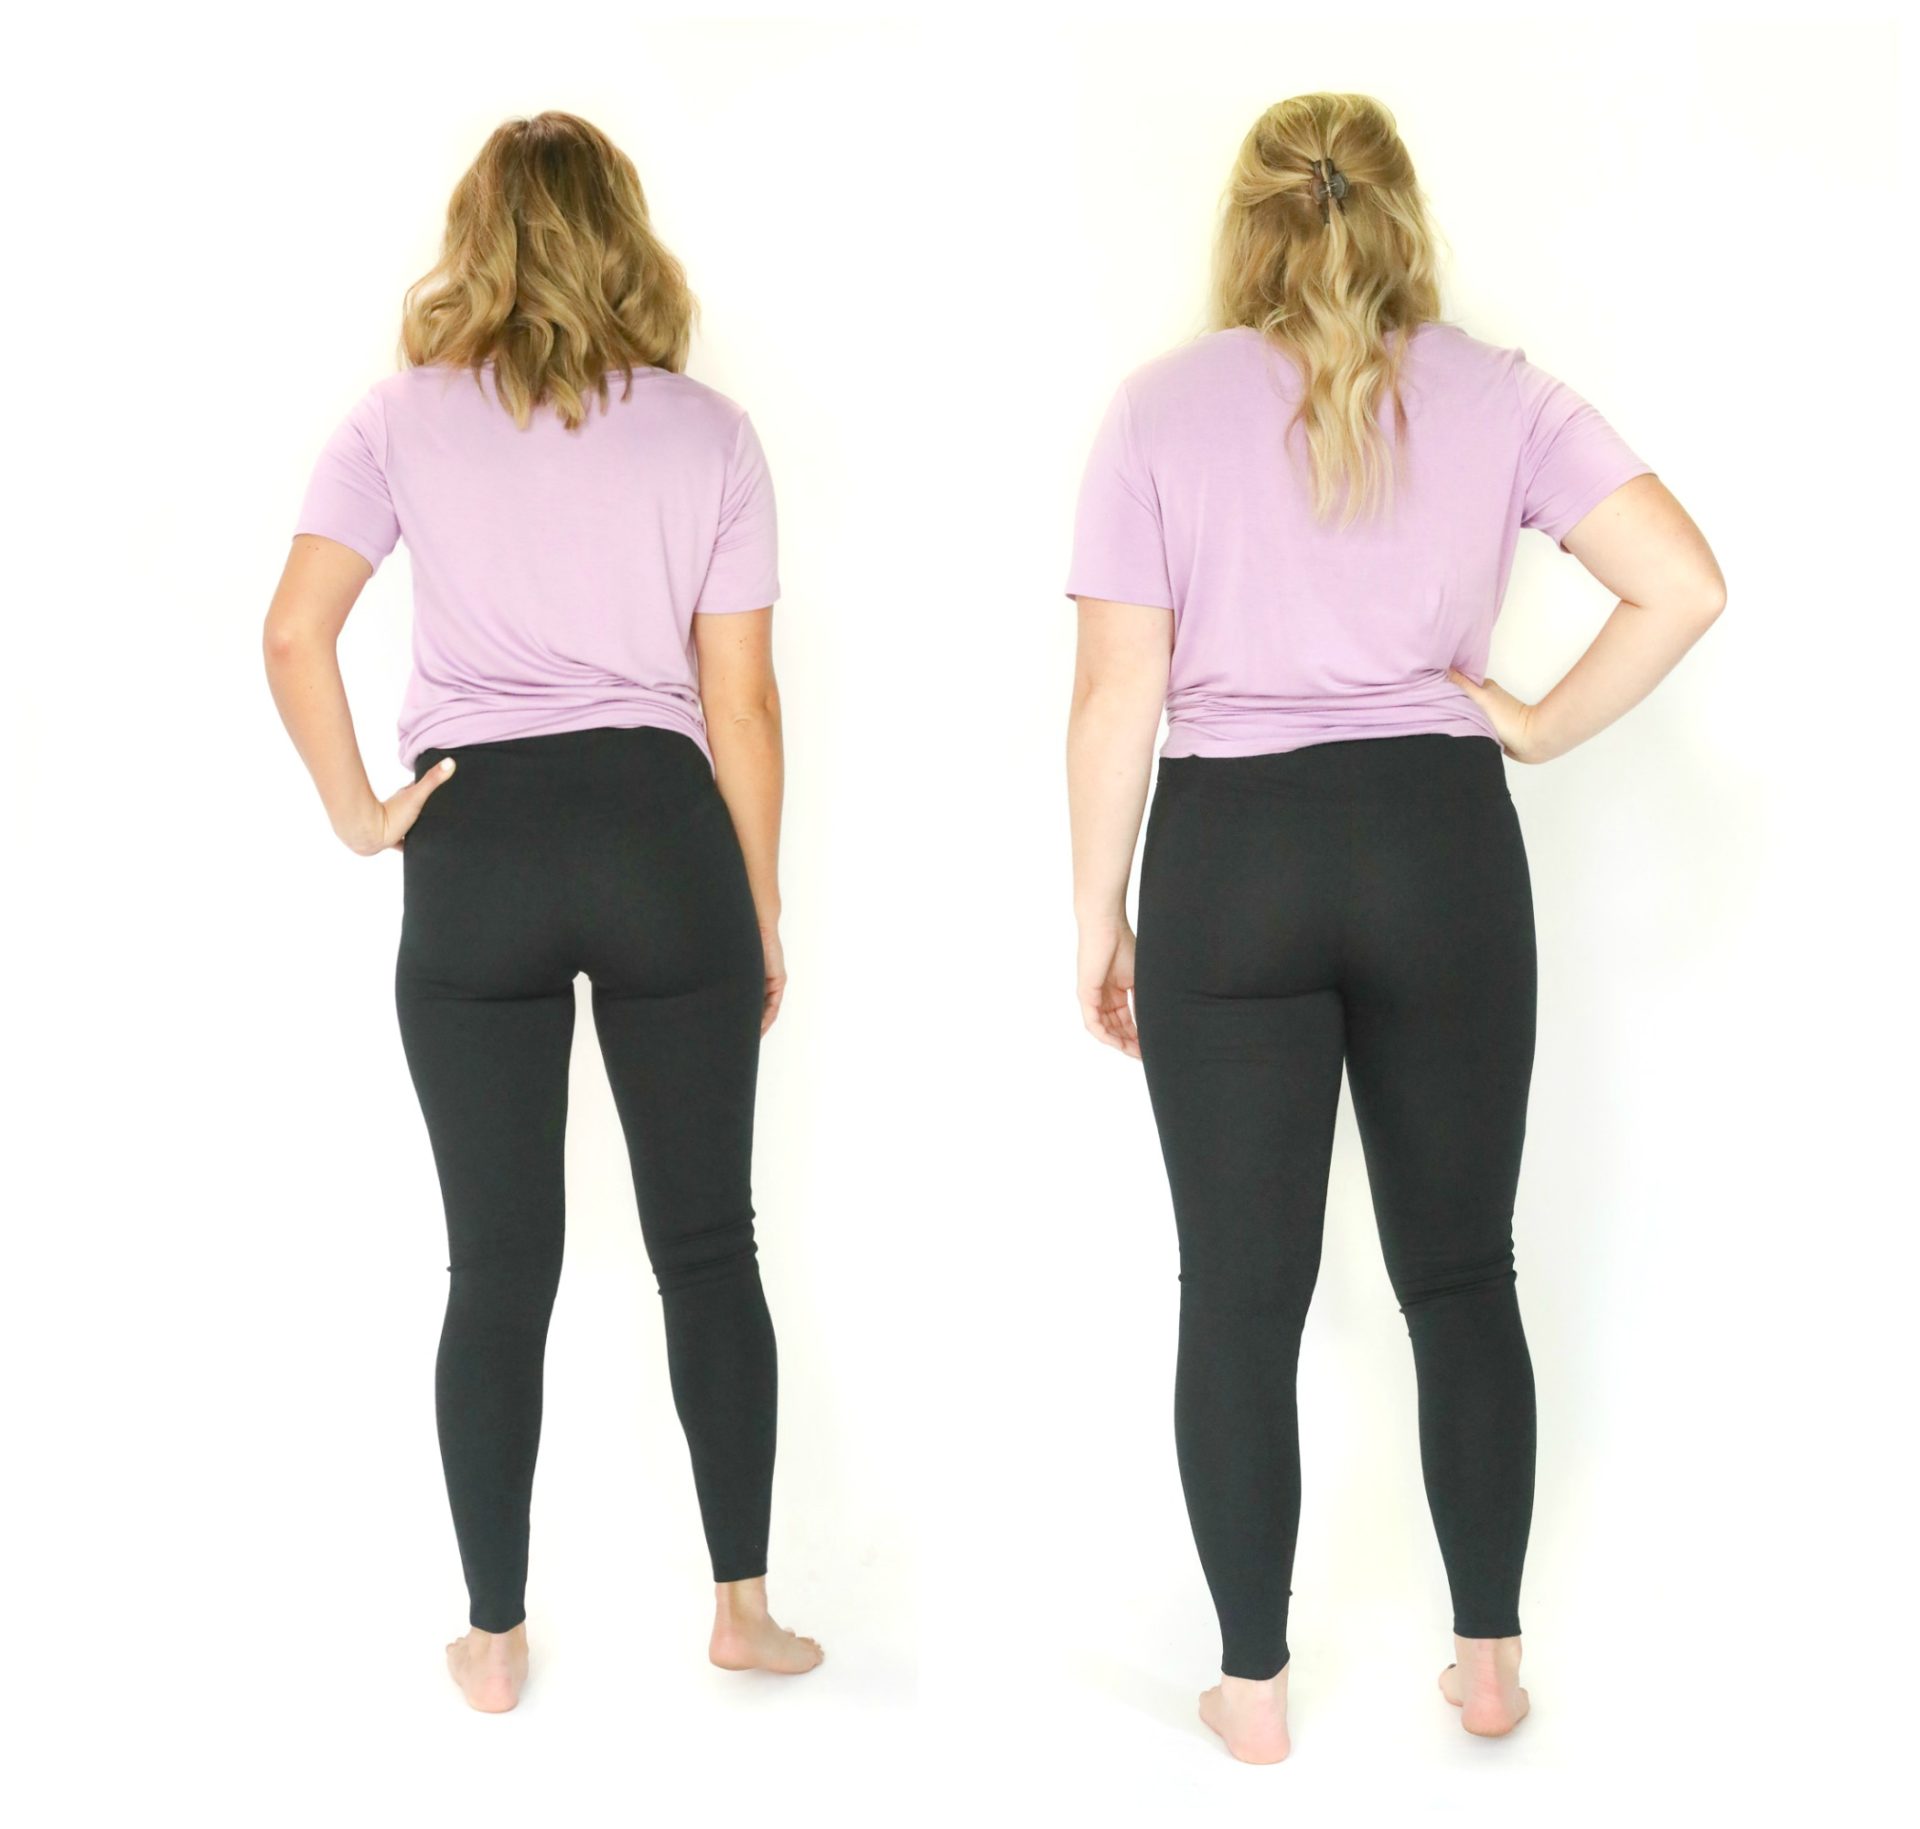 do spanx leggings stretch out over timeline